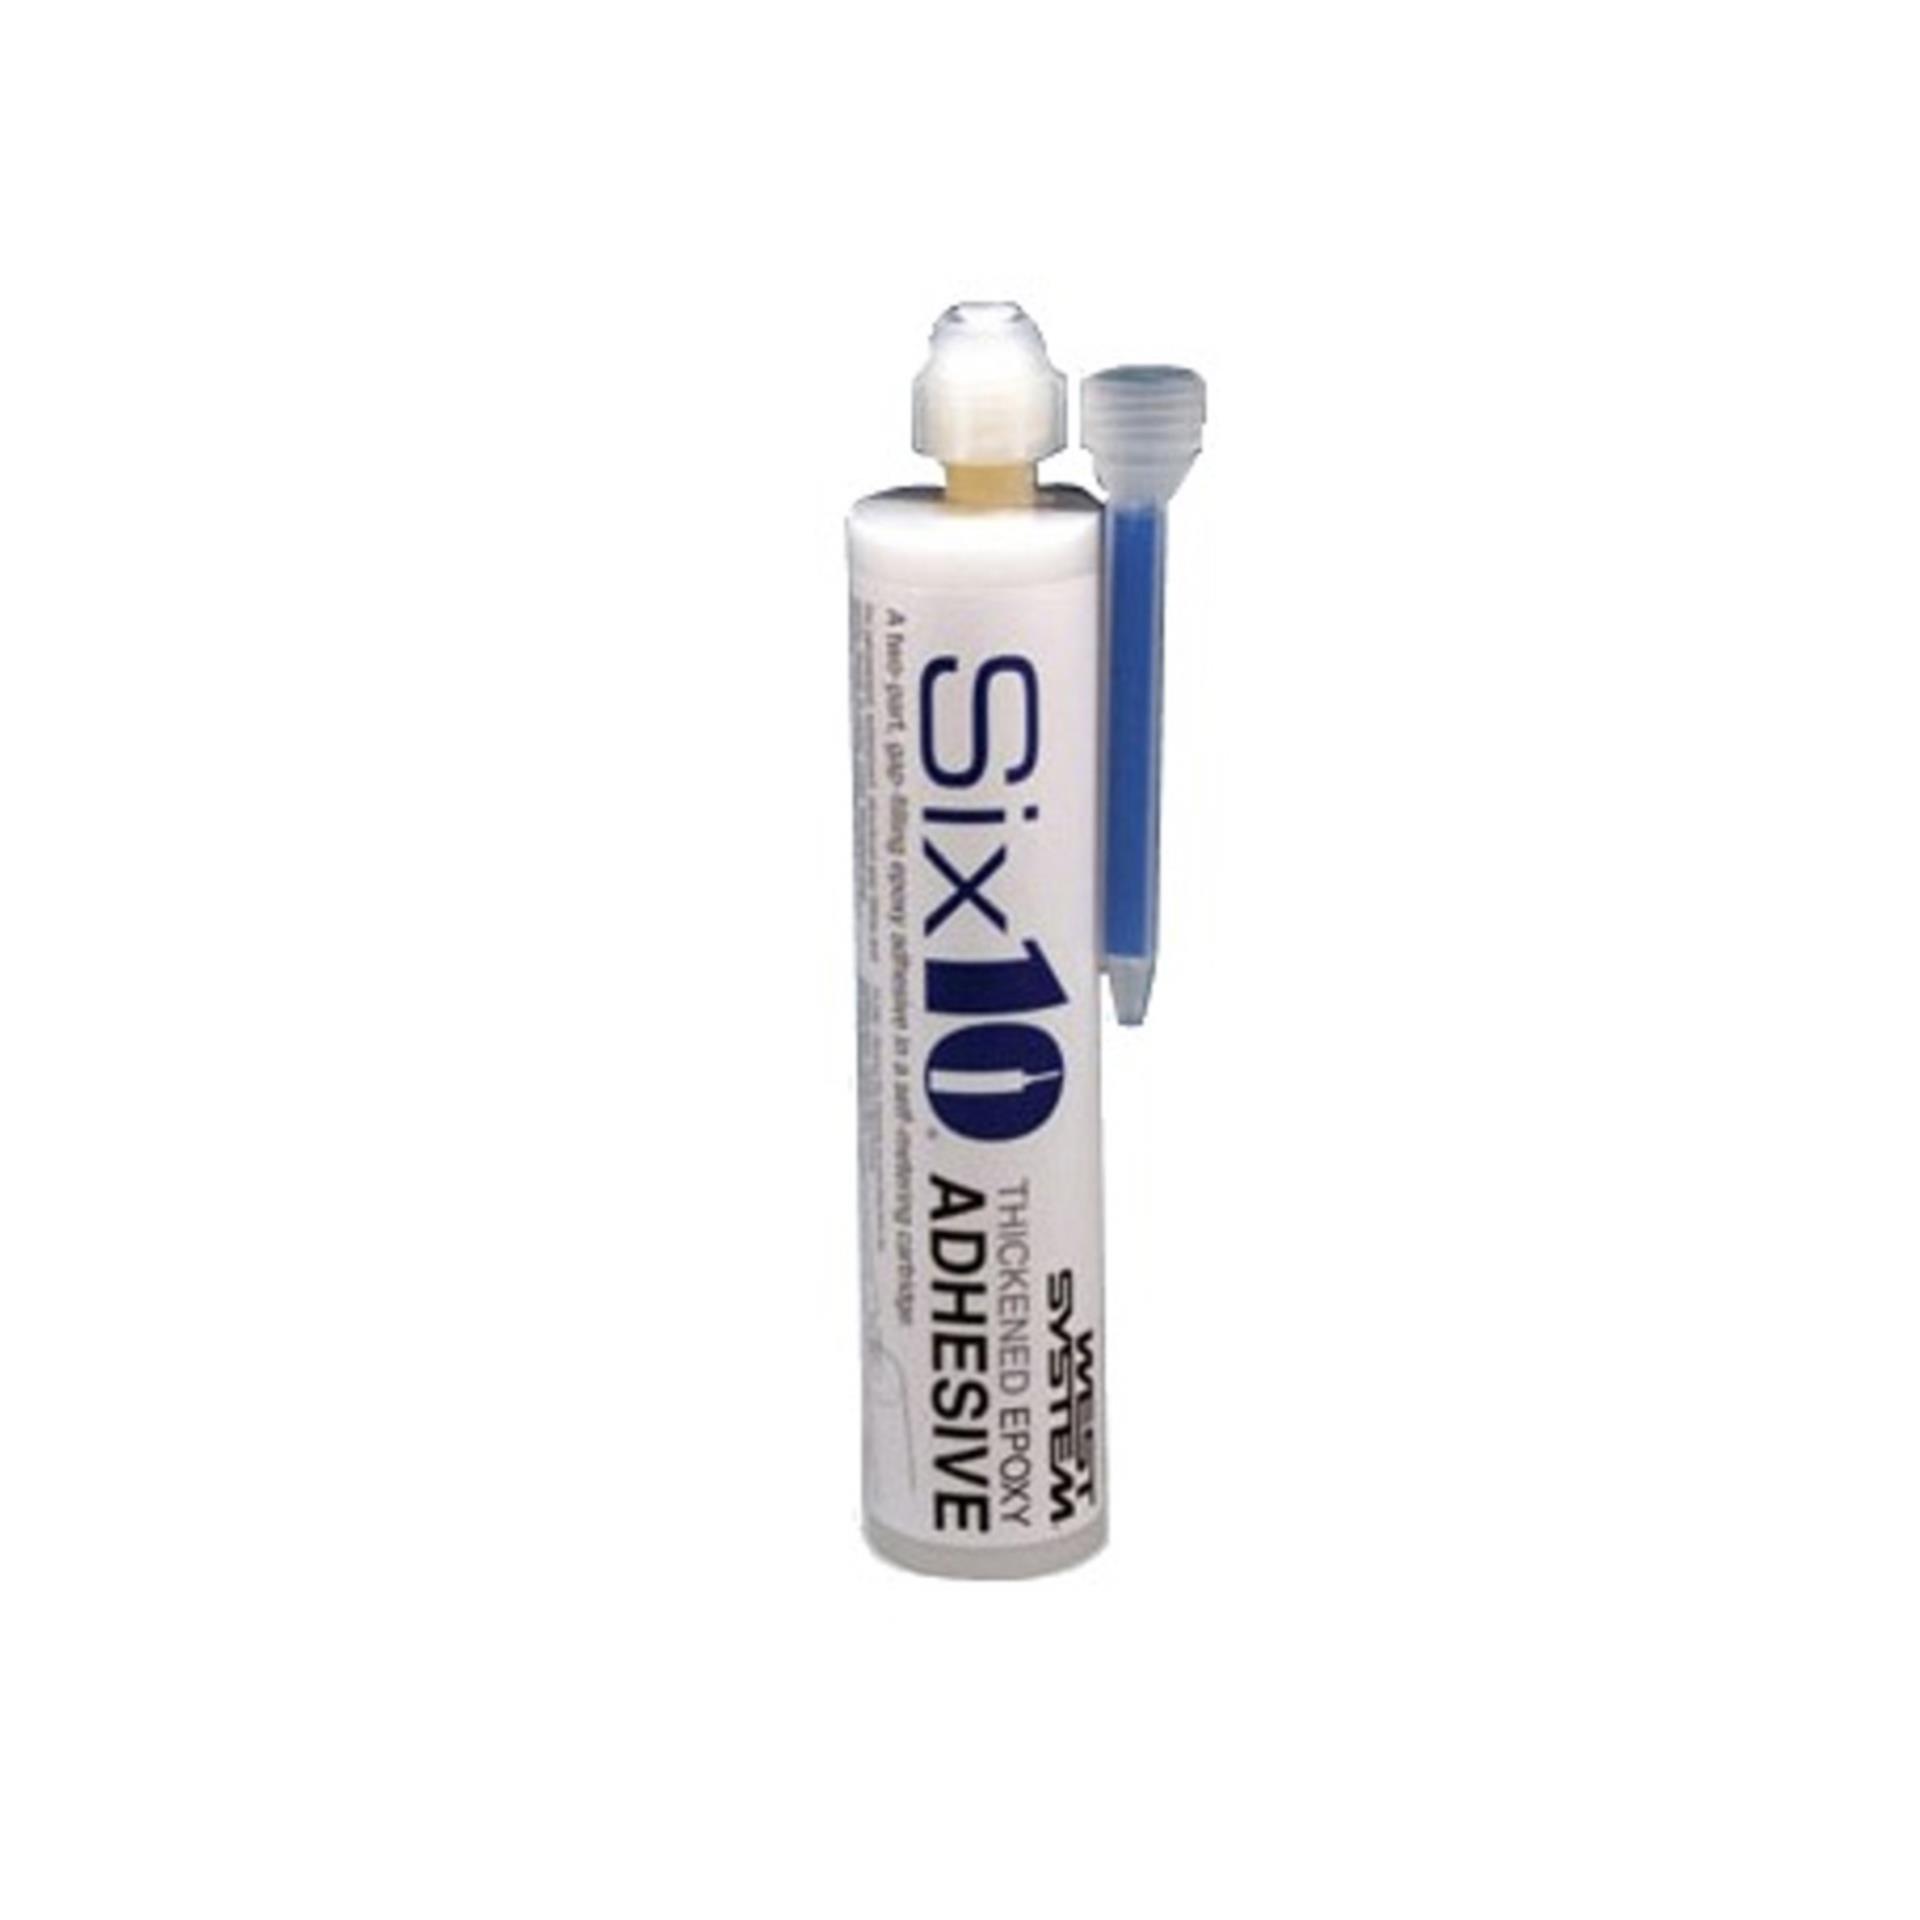 WEST SYSTEM SIX 10 Adhesive, 190 ml